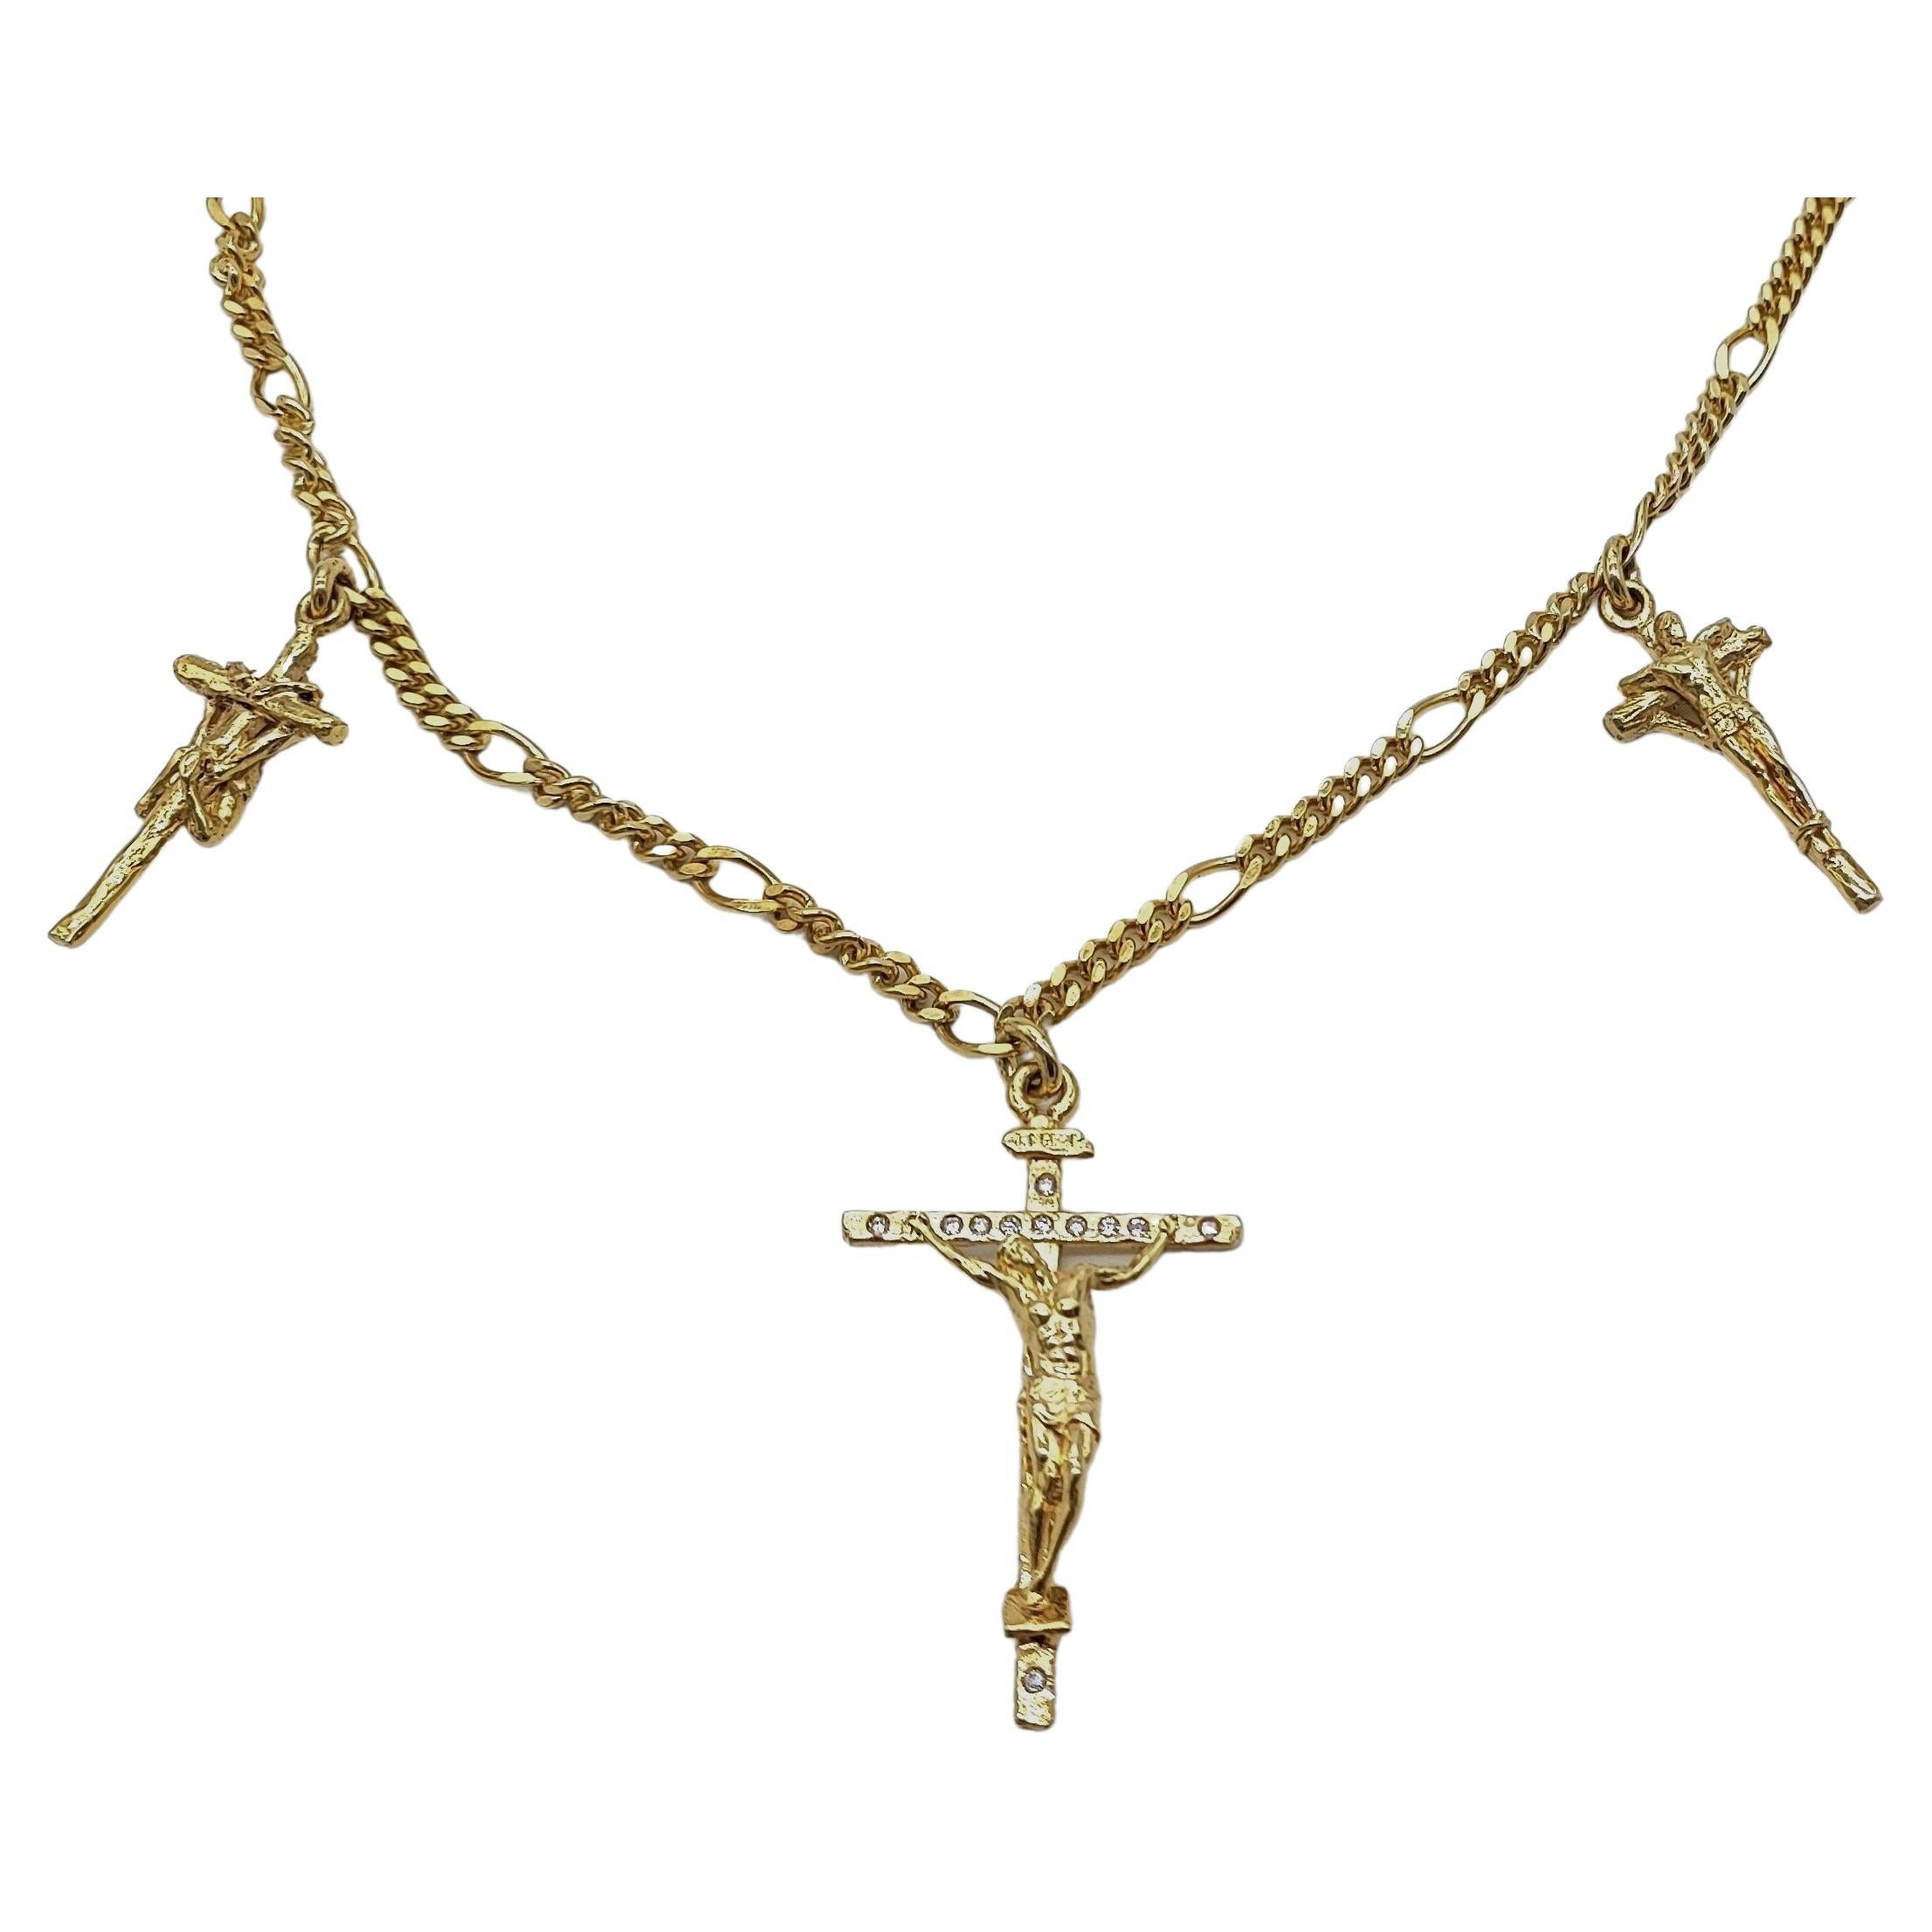 14 Carat Crosses Gold and Diamonds Necklace "Golgota Hill" For Sale